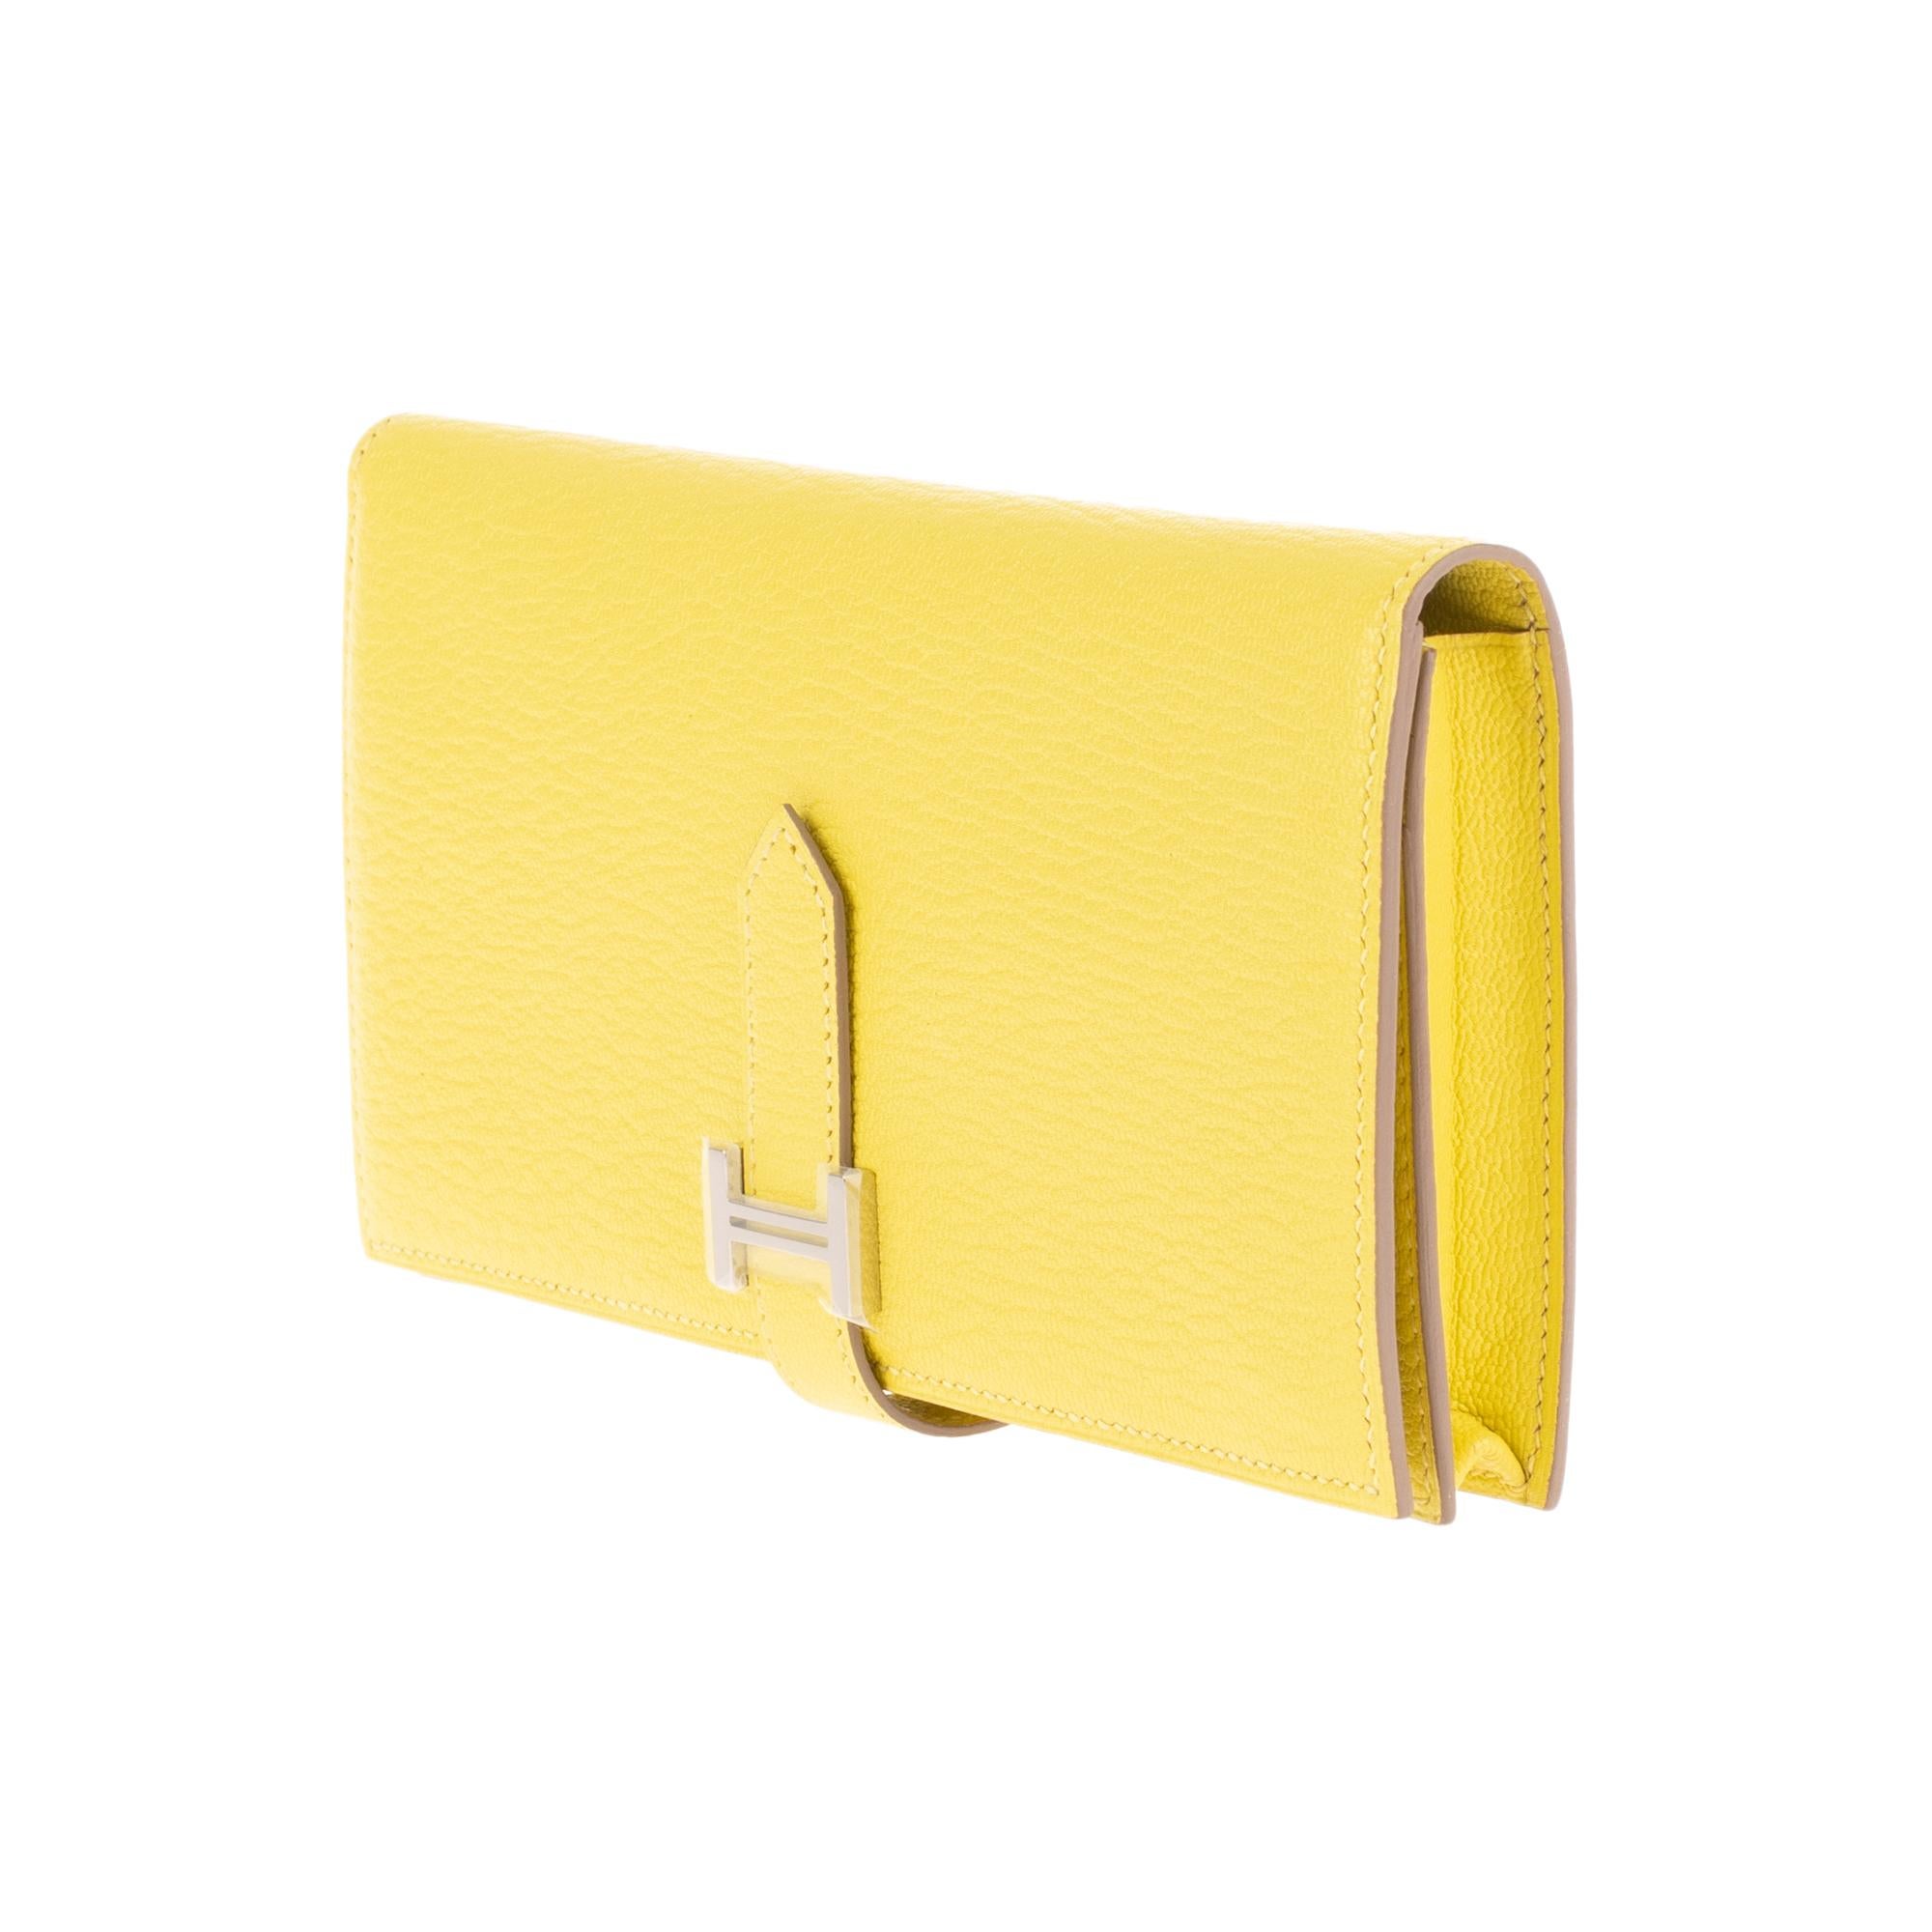 Yellow Brand new Hermès Béarn Wallet in yellow Mysore goat !